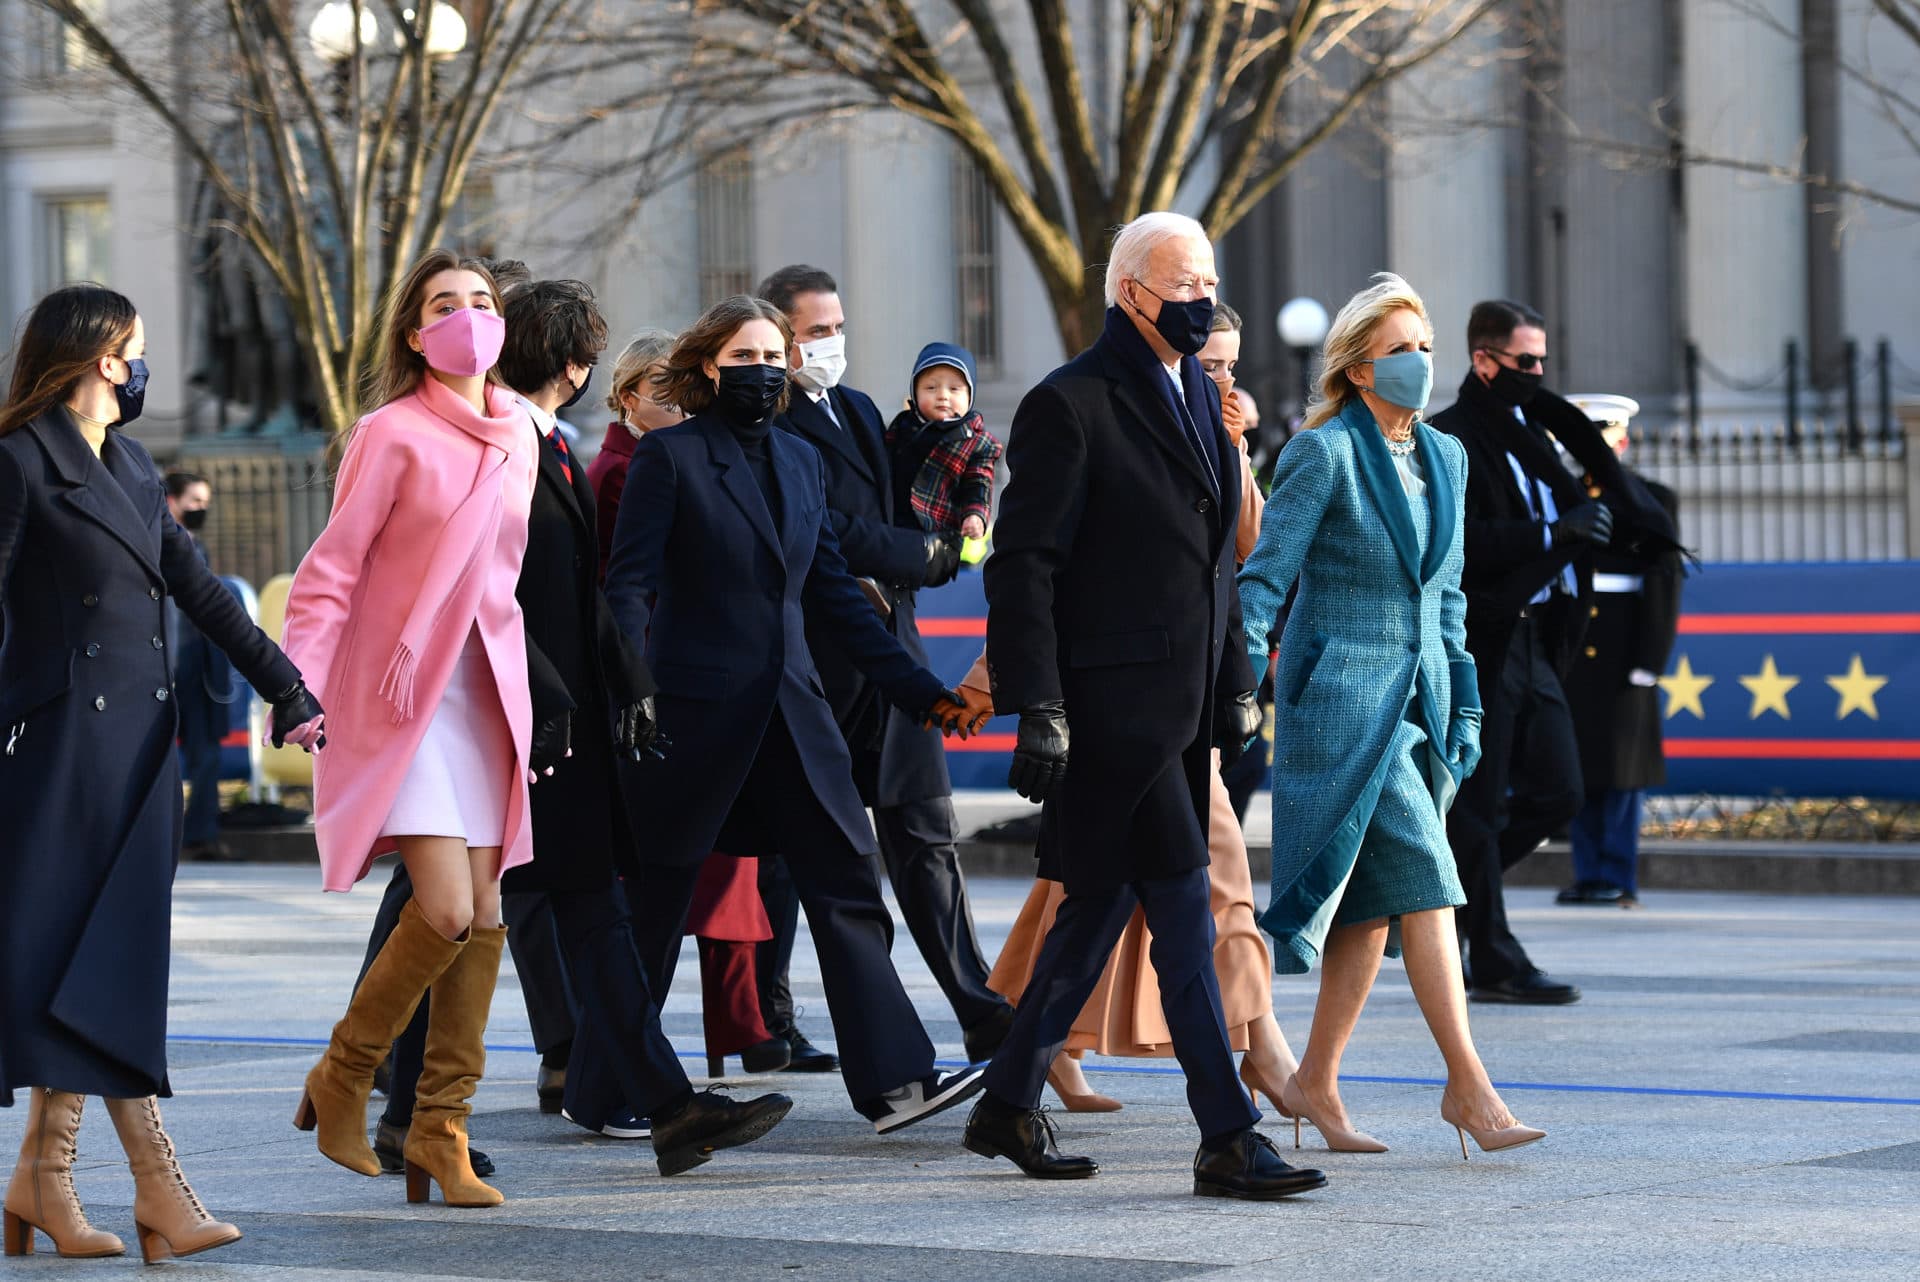 President Joe Biden, First Lady Dr. Jill Biden and family walk the abbreviated parade route after Biden's inauguration. (Mark Makela/Getty Images)